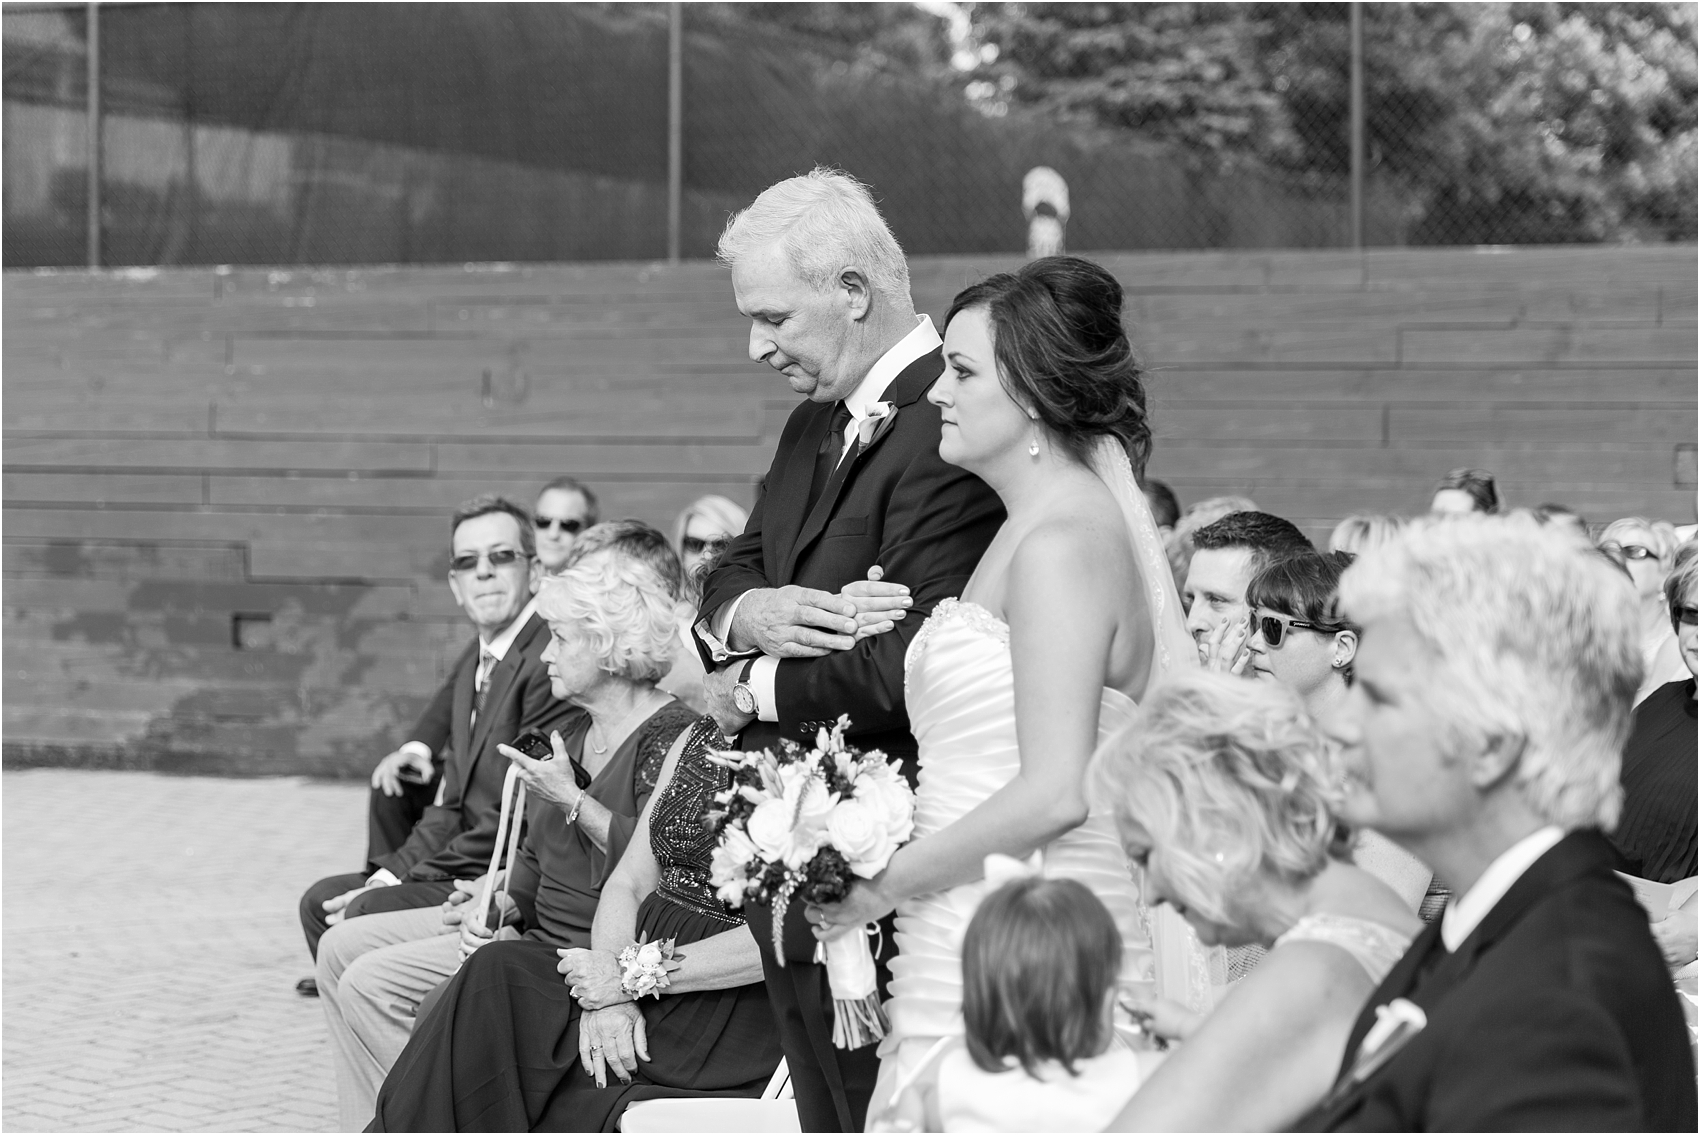 classic-wedding-photos-at-great-oaks-country-club-in-rochester-hills-mi-by-courtney-carolyn-photography_0069.jpg